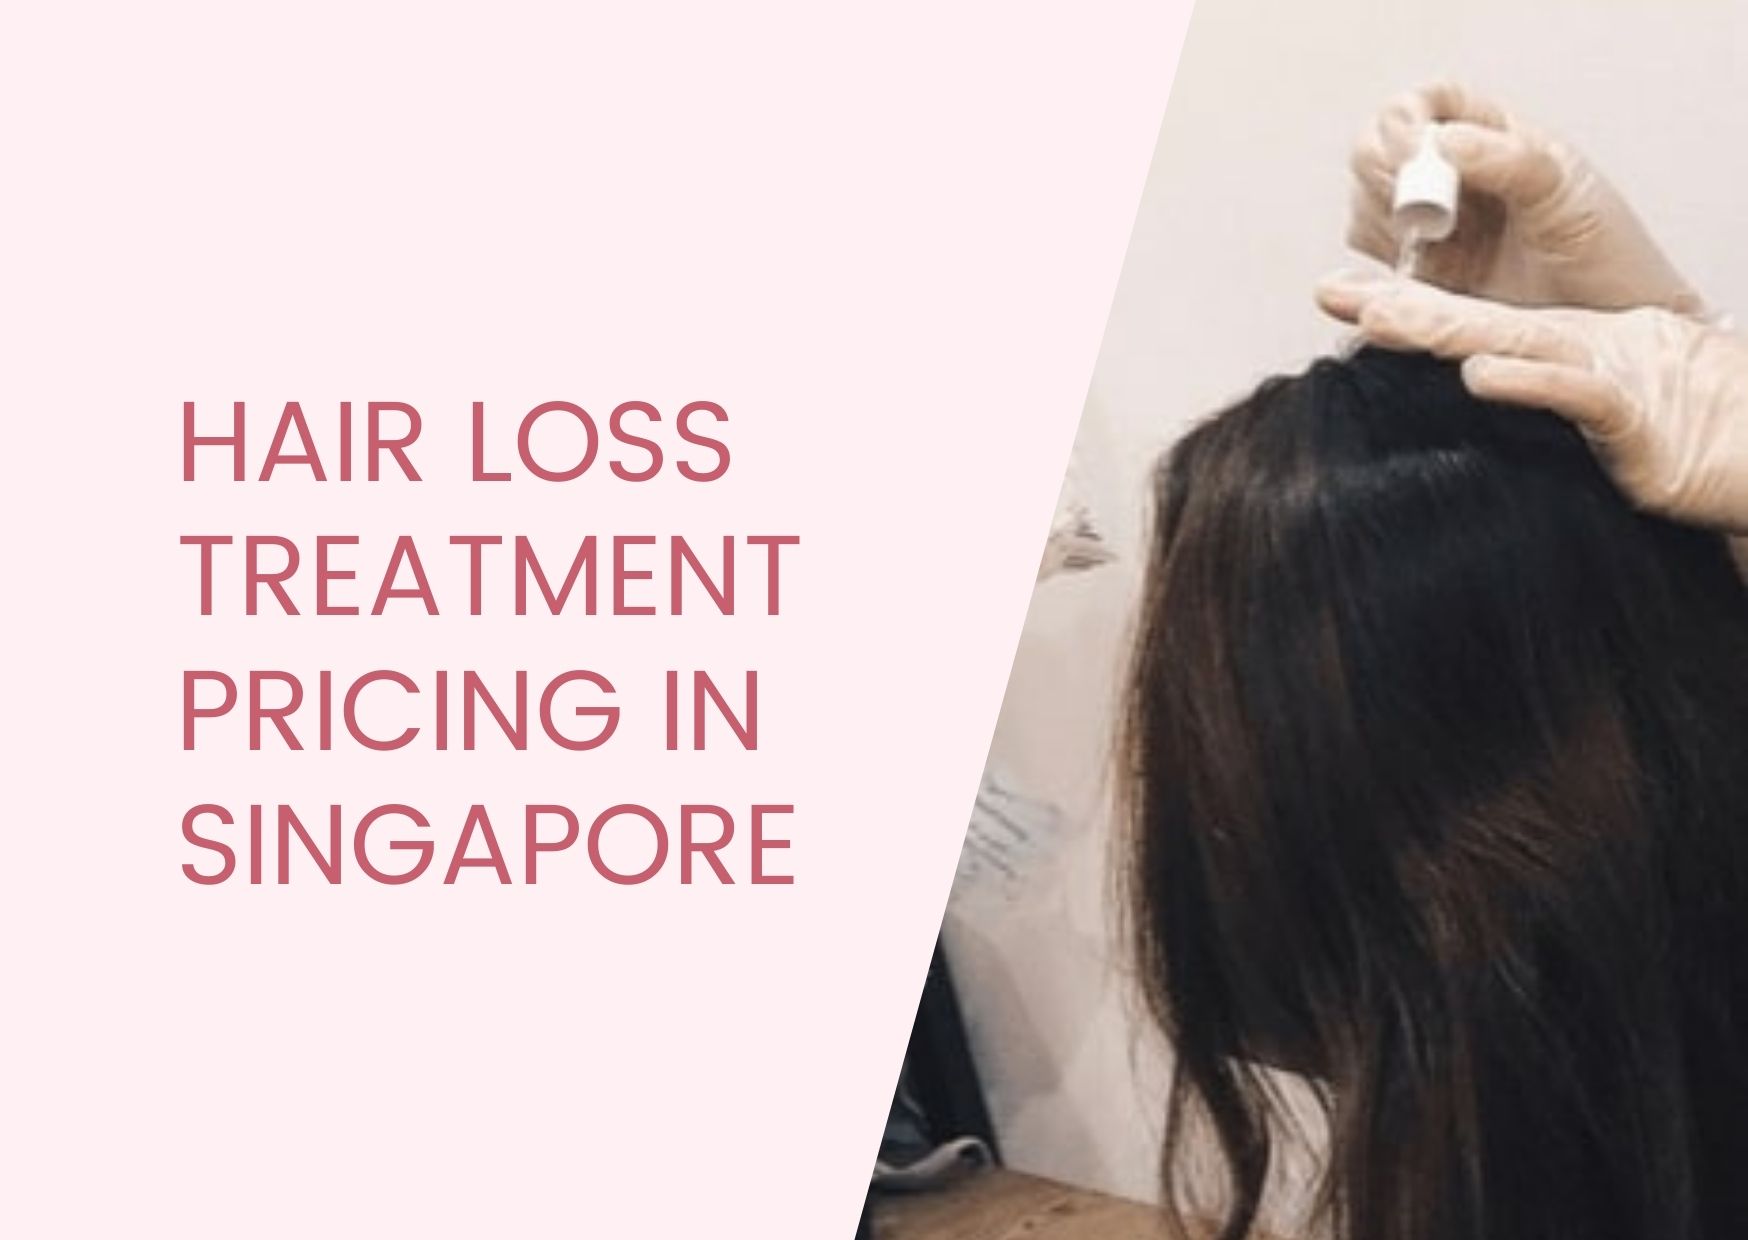 11 Most Highly Rated Salons To Bleach Hair In Singapore That We Personally  Tried And Recommend - ZULA.sg